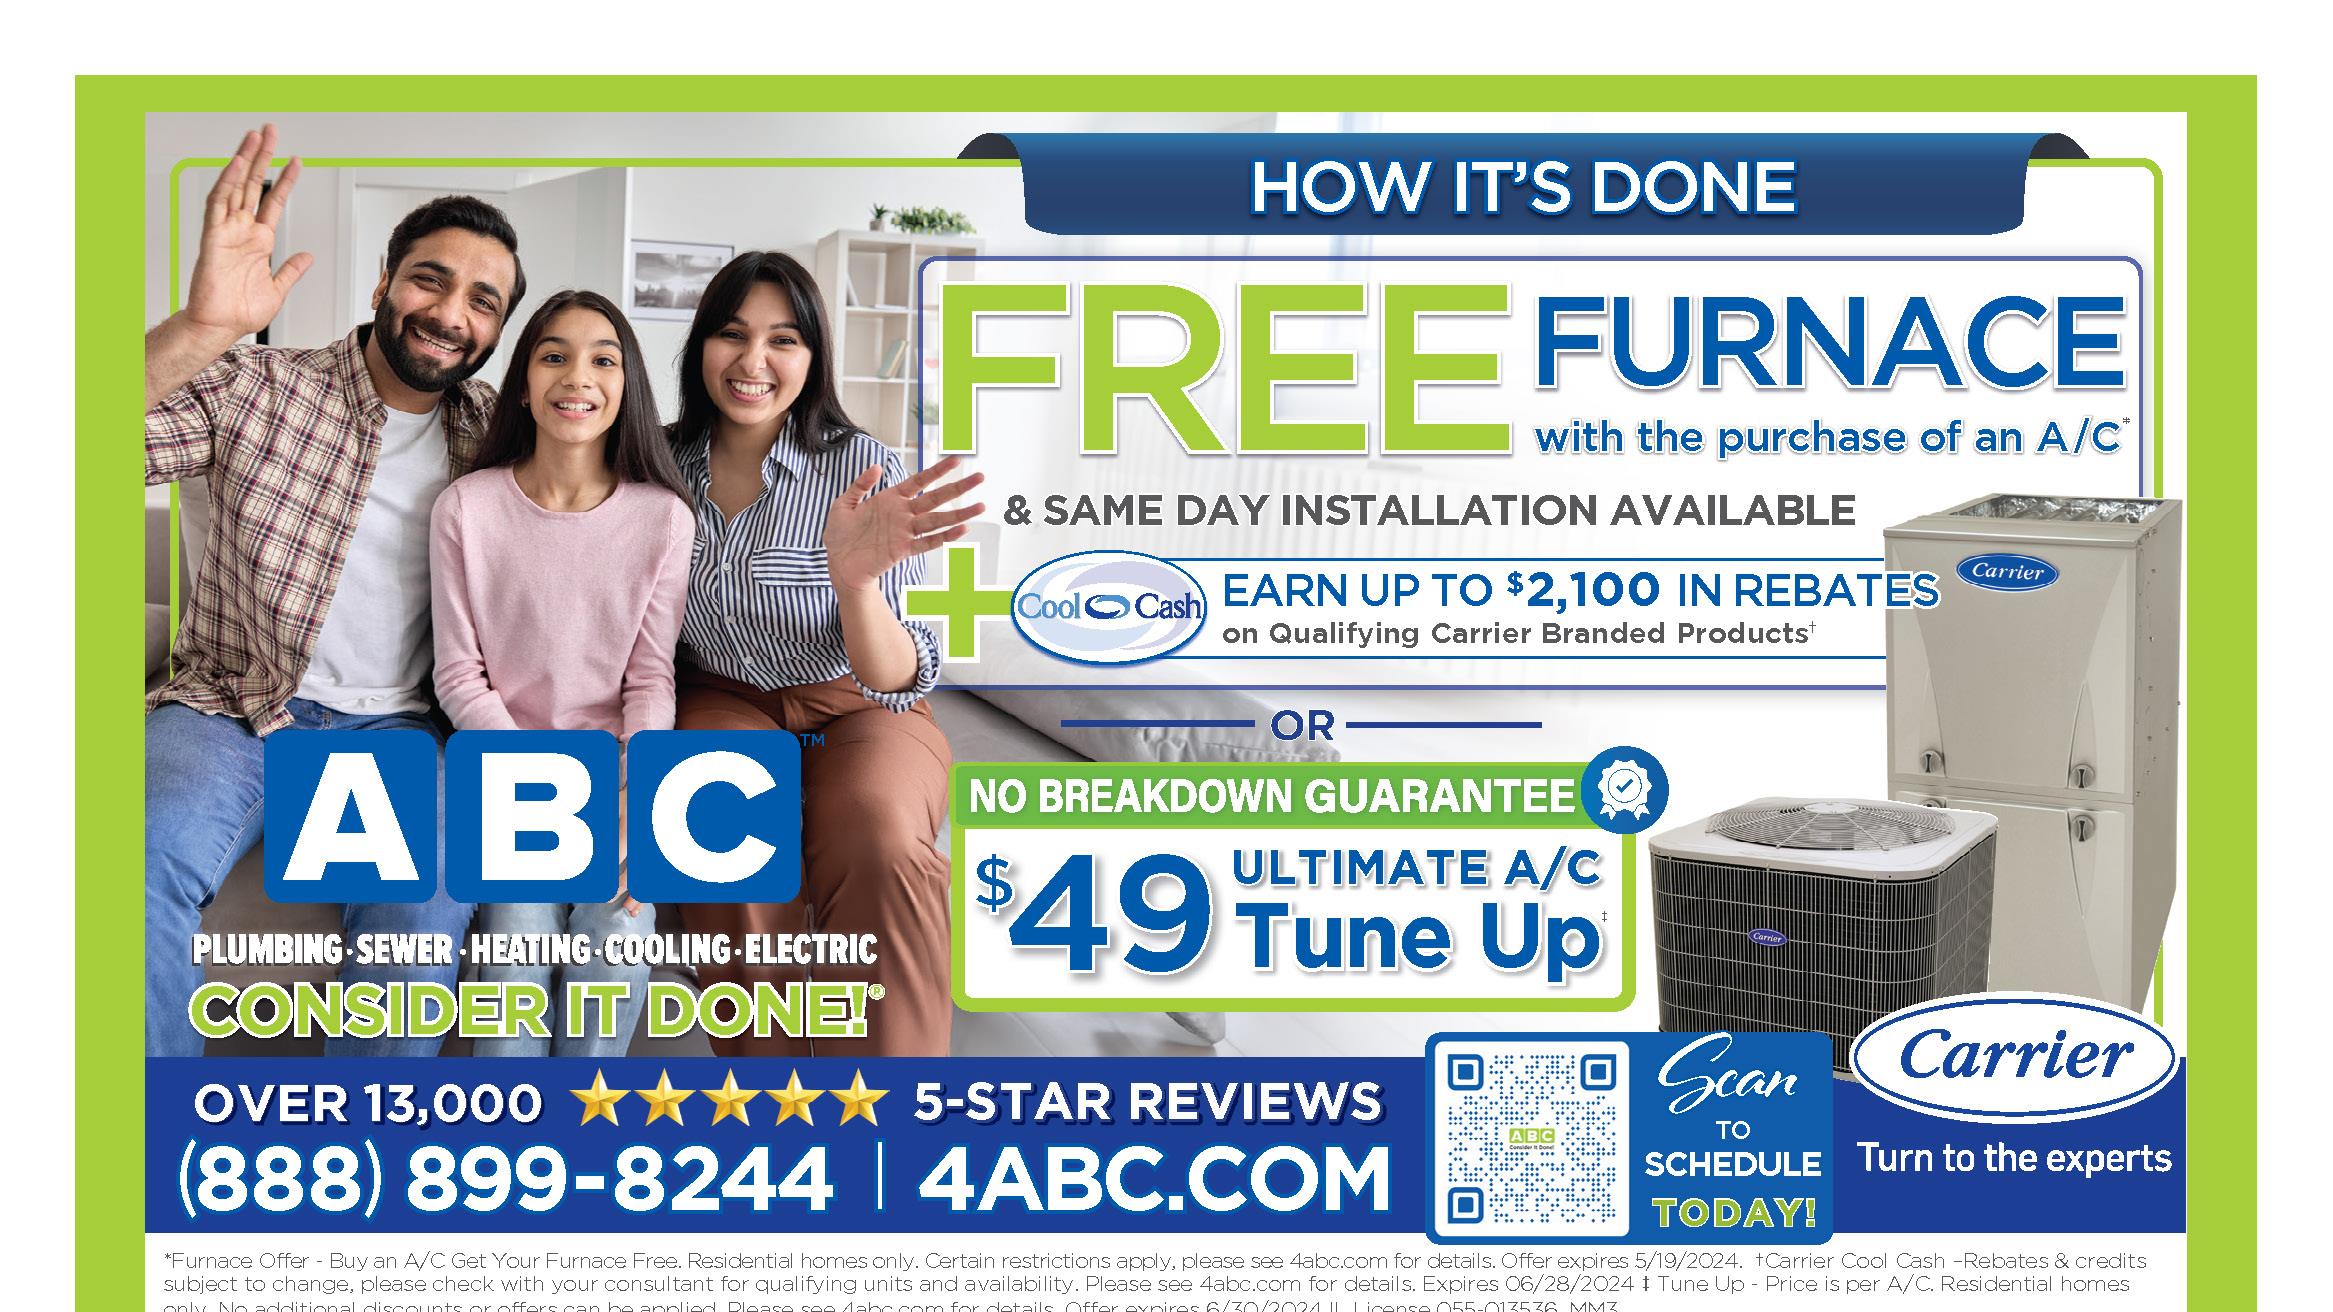 ABC Plumbing, Sewer, Heating, Cooling & Electric